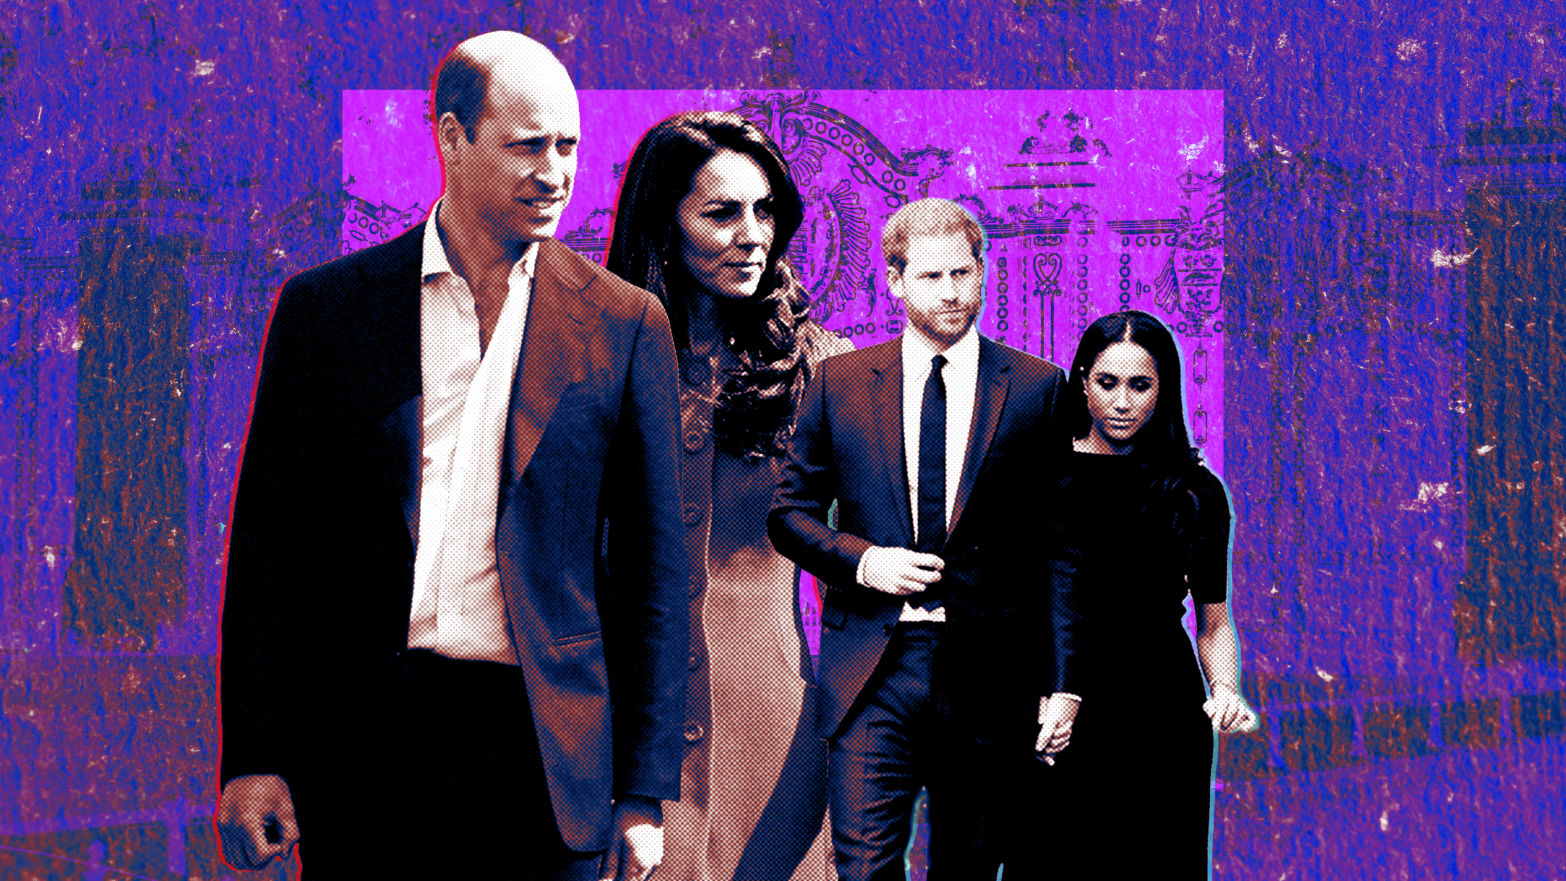 A photo illustration of Prince William, Kate Middleton, Prince Harry, and Meghan Markle.